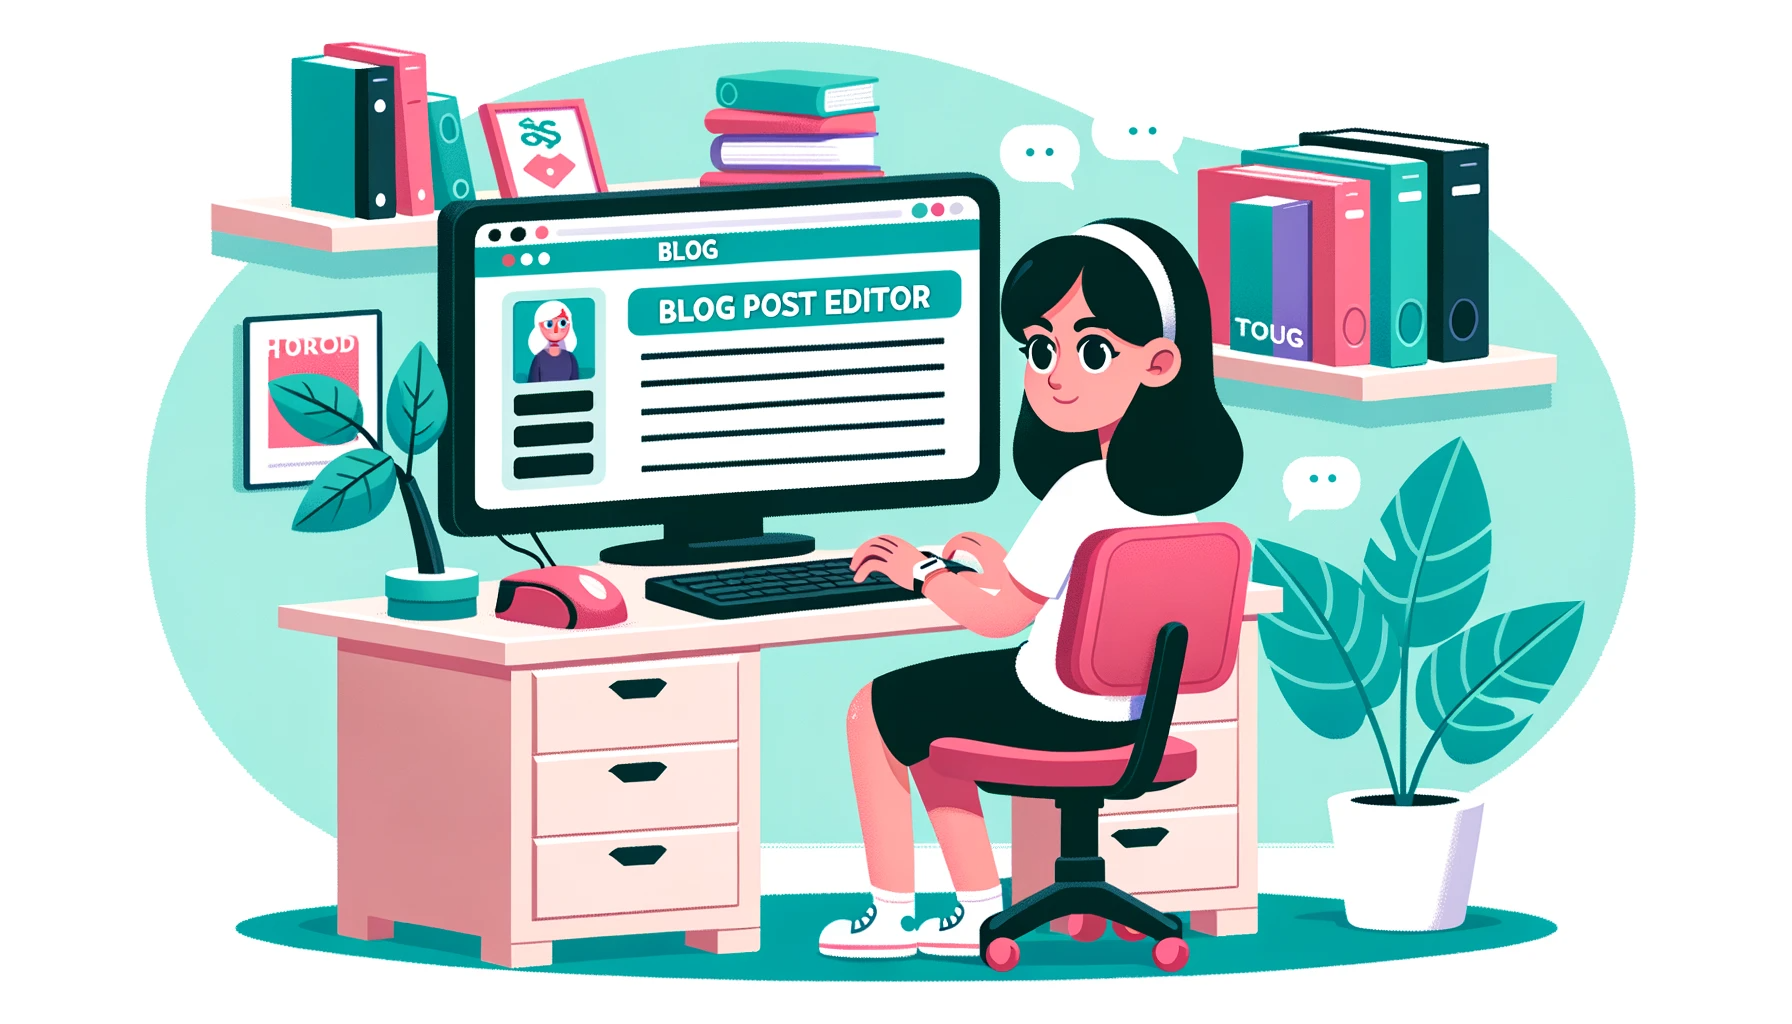 Cartoon scene of a female programmer with Caucasian descent, immersed in updating her self-hosted blog via a computer. The computer screen exhibits a blog post editor. Surrounding her is a vibrant office setup with books and tech accessories.